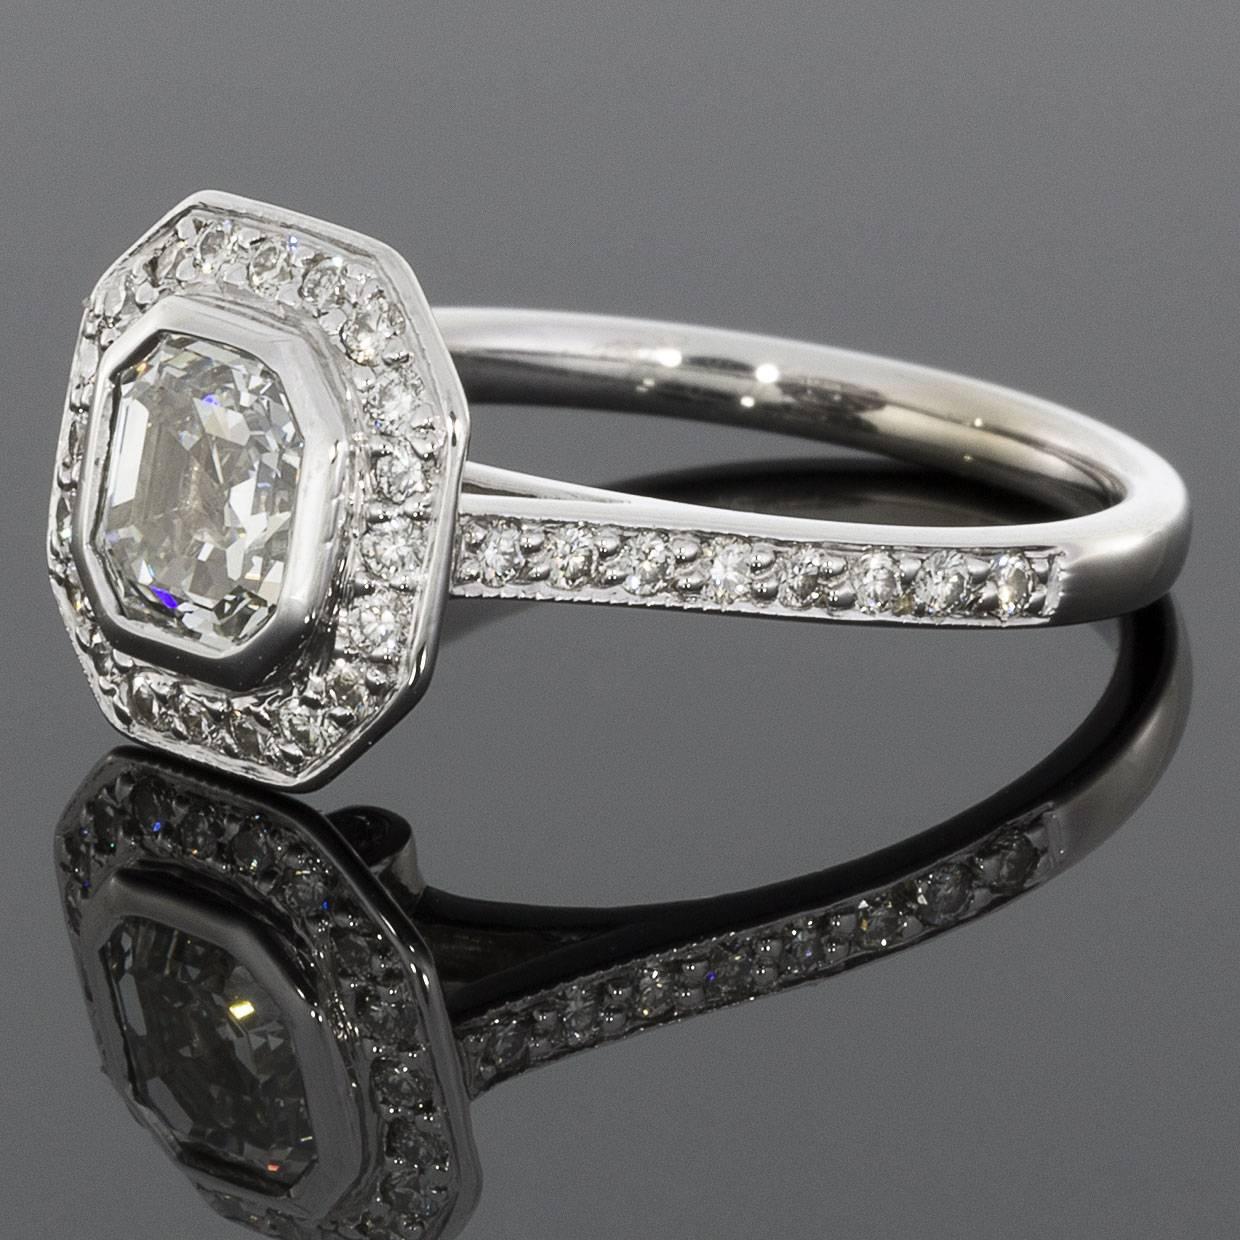 Asscher cut diamonds are a great option if you are looking for something unique that has sparkle all its own. The asscher cut's octagonal shape has more brilliance than an emerald cut & appears to have an endless hallway of reflective mirrors